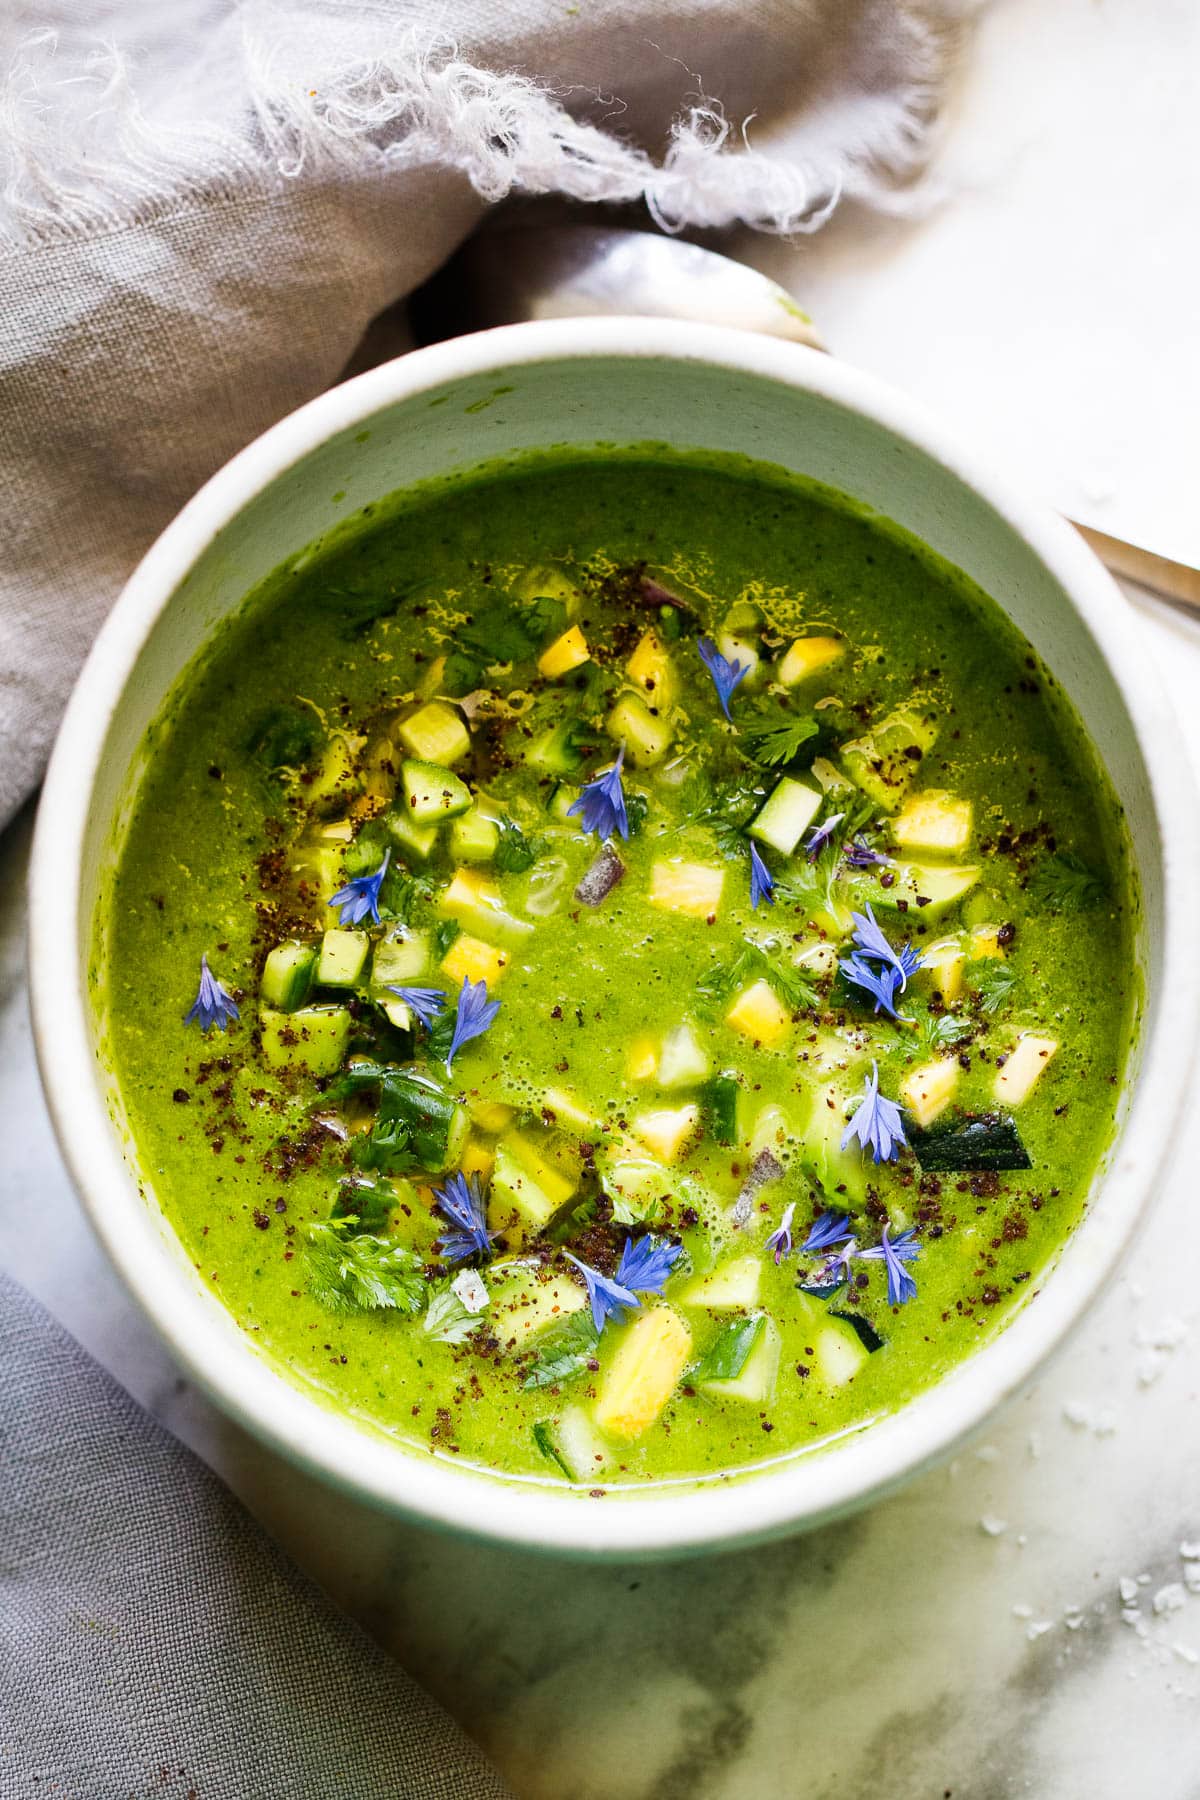 Here's a refreshing recipe for Green Gazpacho - a chilled raw soup, made with fresh garden ingredients that can be made in 15 minutes. A nourishing and delicious summer treat! 